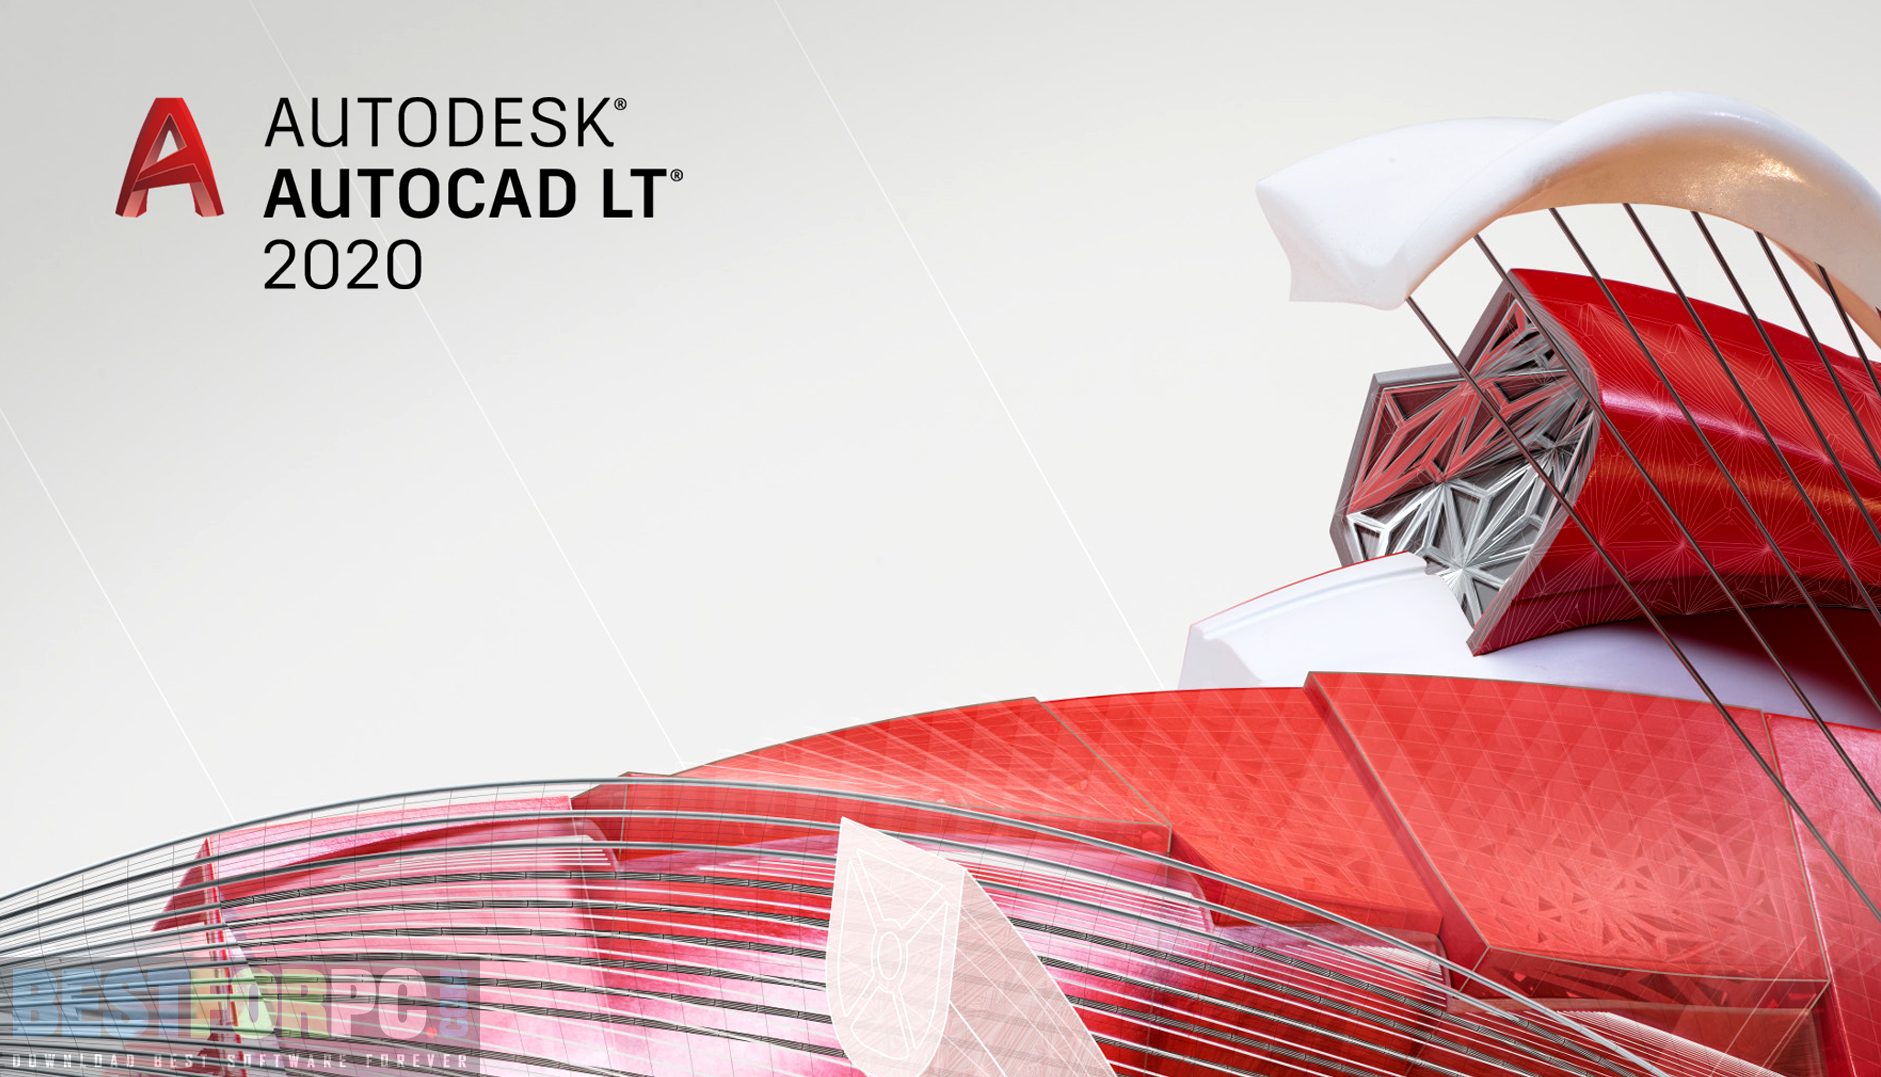 Autocad 2021 download free for pc download coreldraw x7 free download full version with crack 64-bit